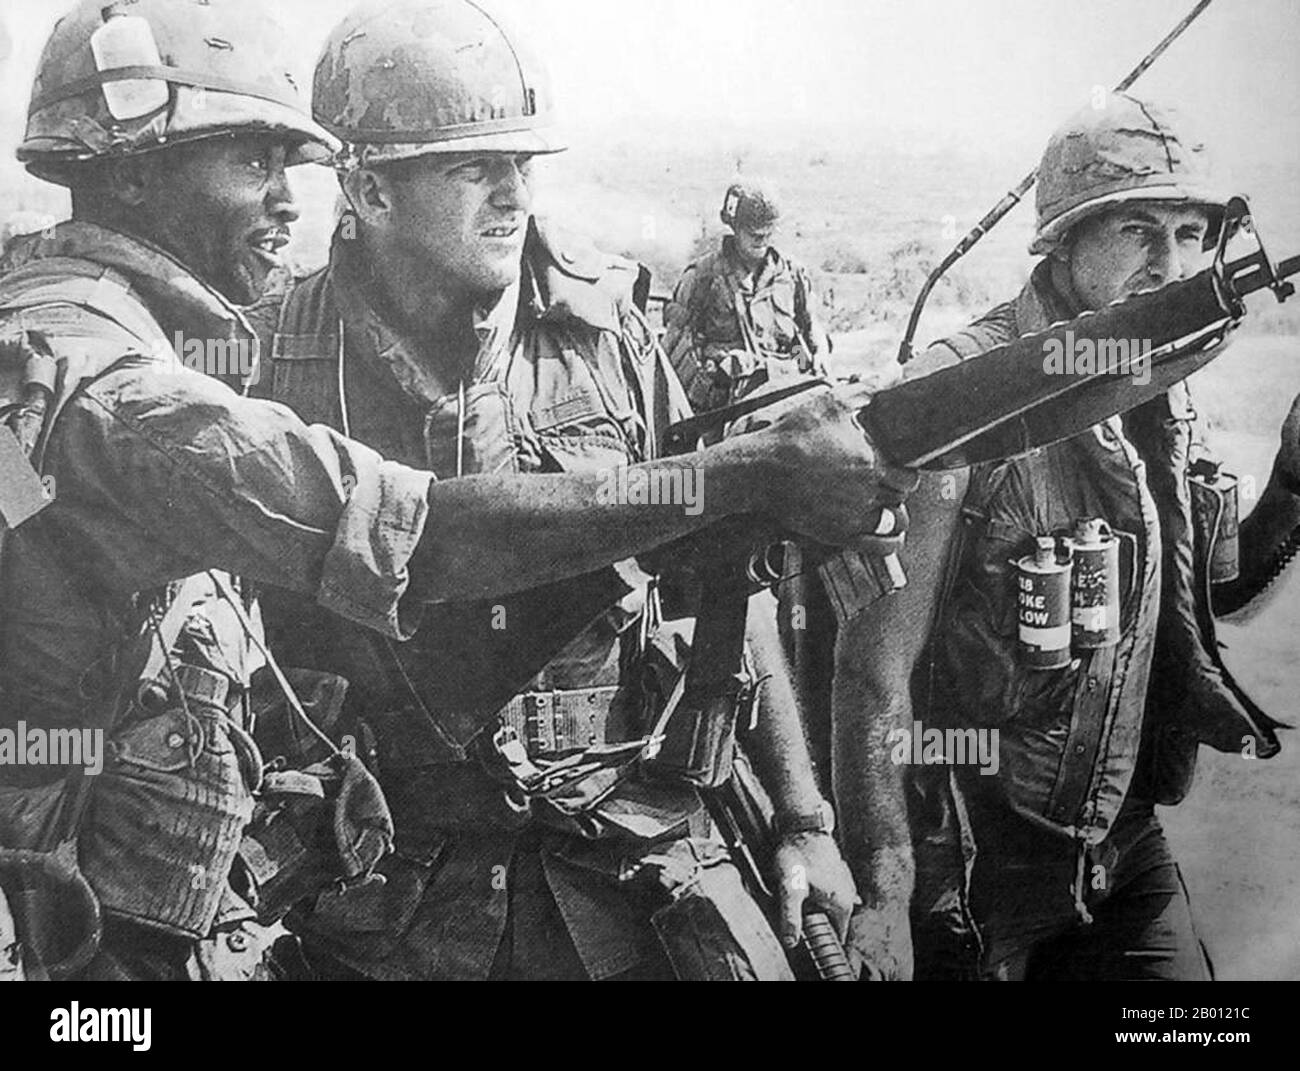 Vietnam: US Army soldiers in action during the 1968 Tet Offensive at Hue, central Vietnam.  The Tet Offensive was a military campaign during the Vietnam War that began on January 31, 1968. Regular and irregular forces of the People's Army of Vietnam, as well as NLF (Viet Cong) resistance fighters, fought against the forces of the Republic of Vietnam (South Vietnam), the United States, and their allies. The purpose of the offensive was to strike military and civilian command and control centers throughout South Vietnam and to spark a general uprising among the population. Stock Photo